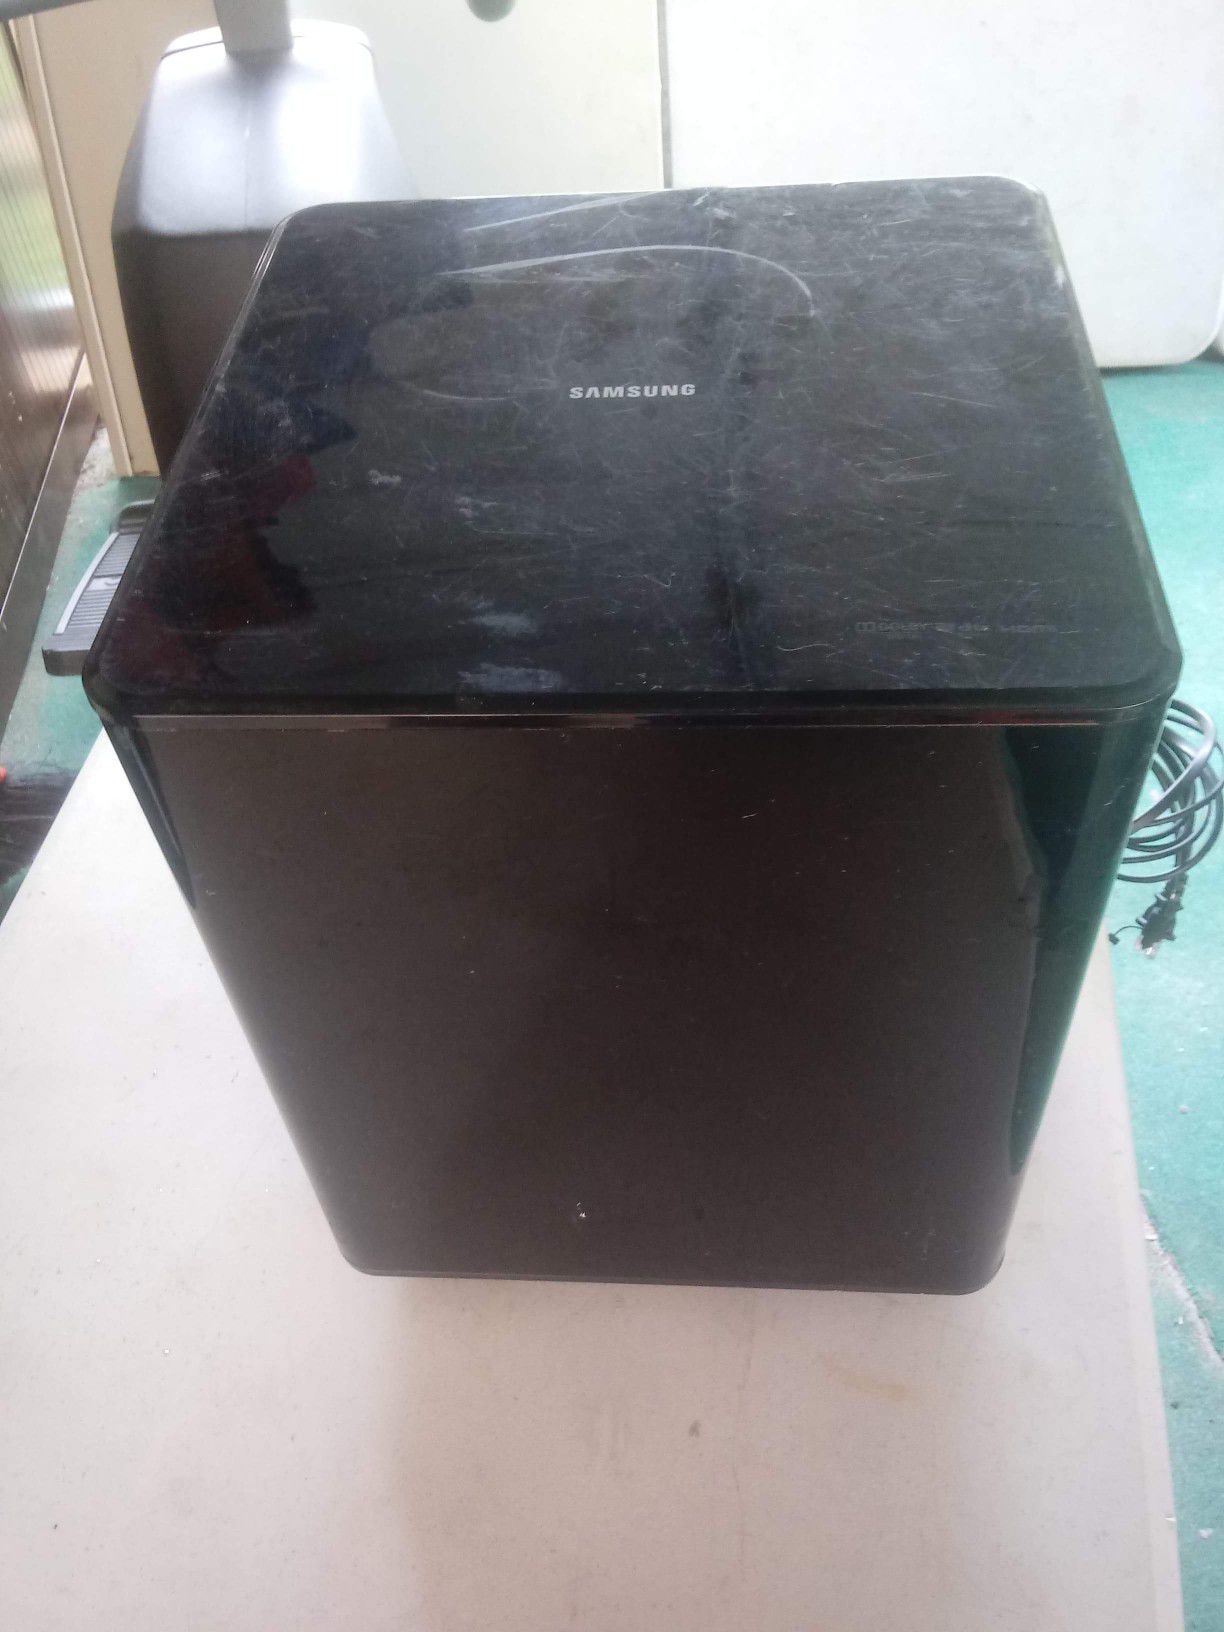 Samsung ps-wh551 subwoofer only"